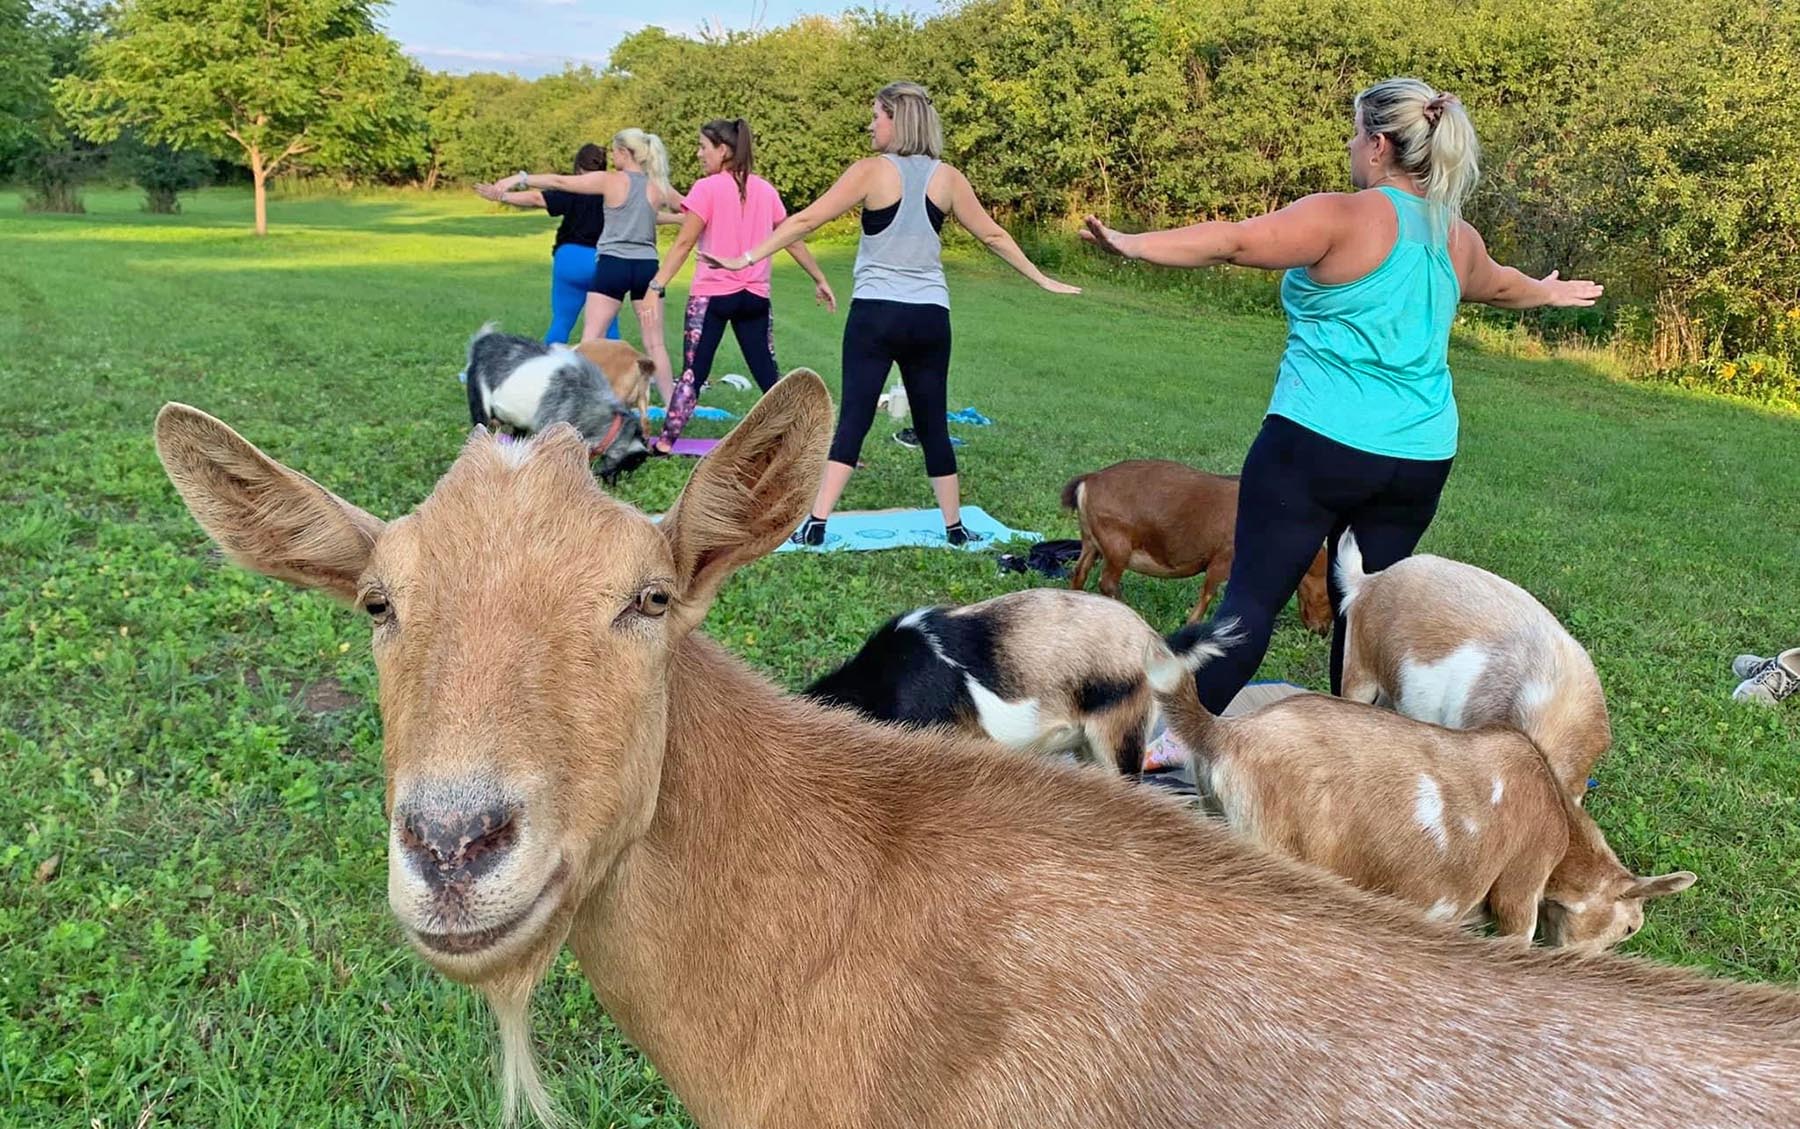 Photo of yoga class participants doing a yoga pose with goats all around them at Outskirts 1812